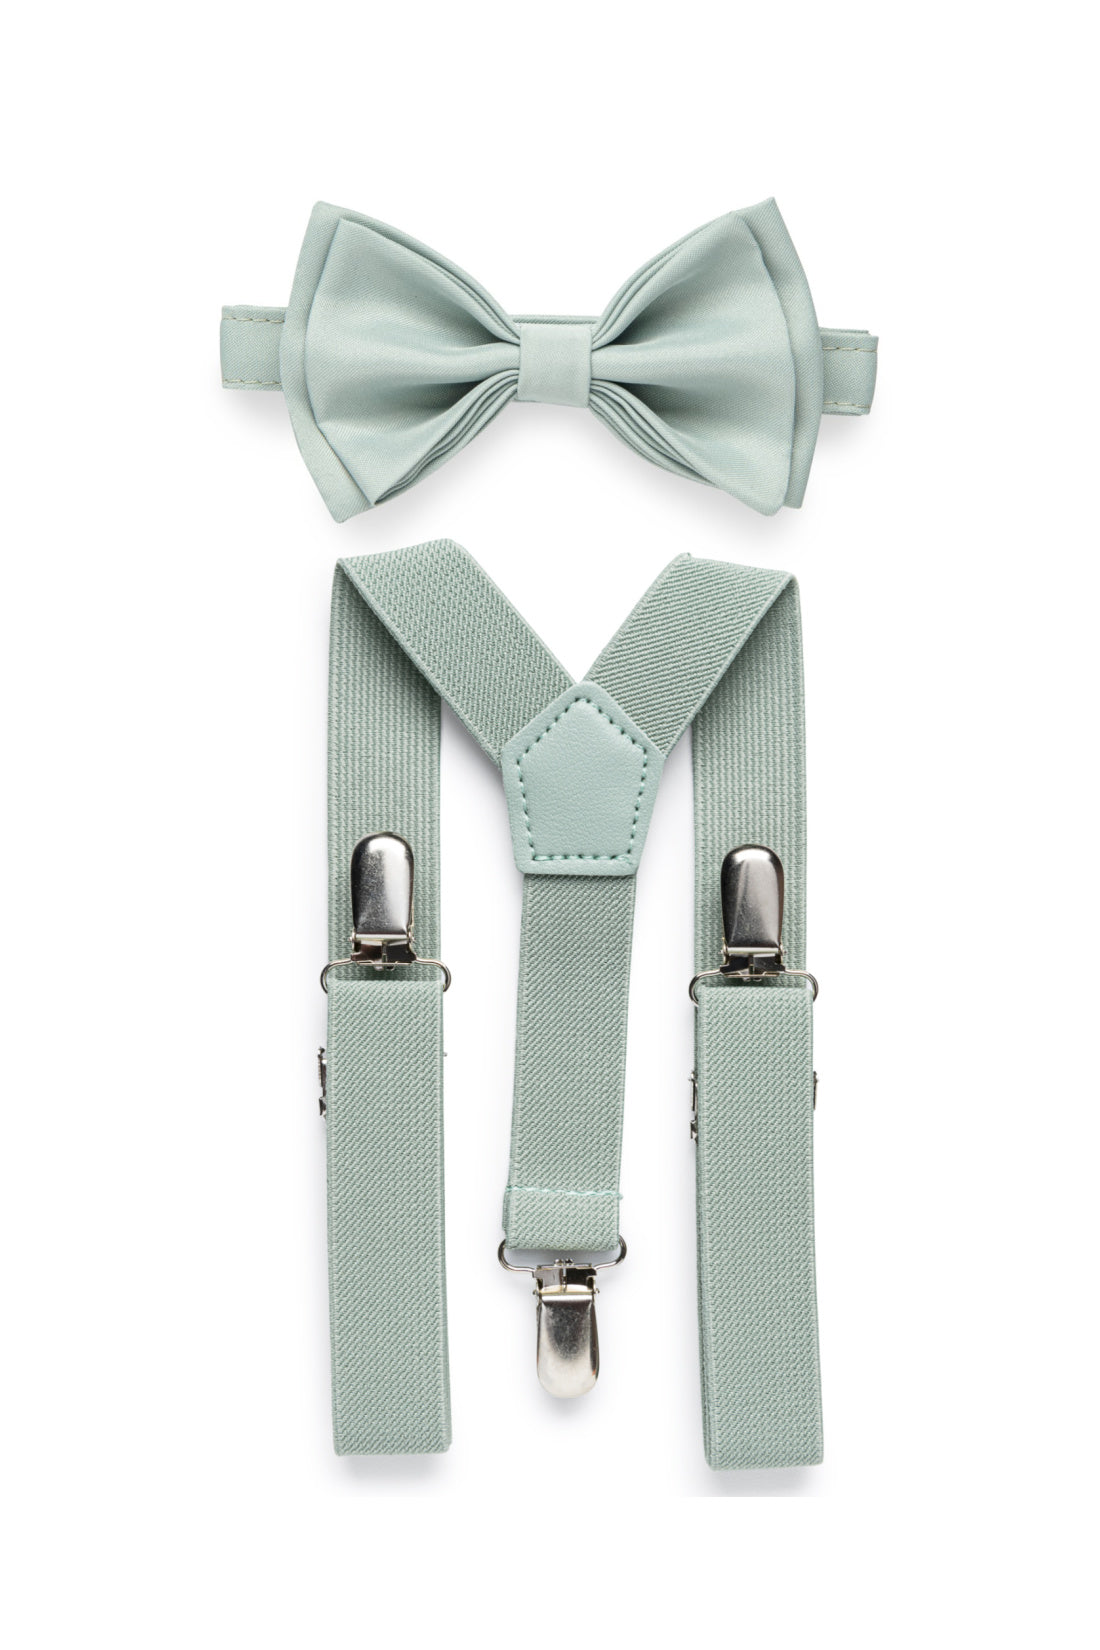 Dusty sage suspenders and dusty sage bow tie